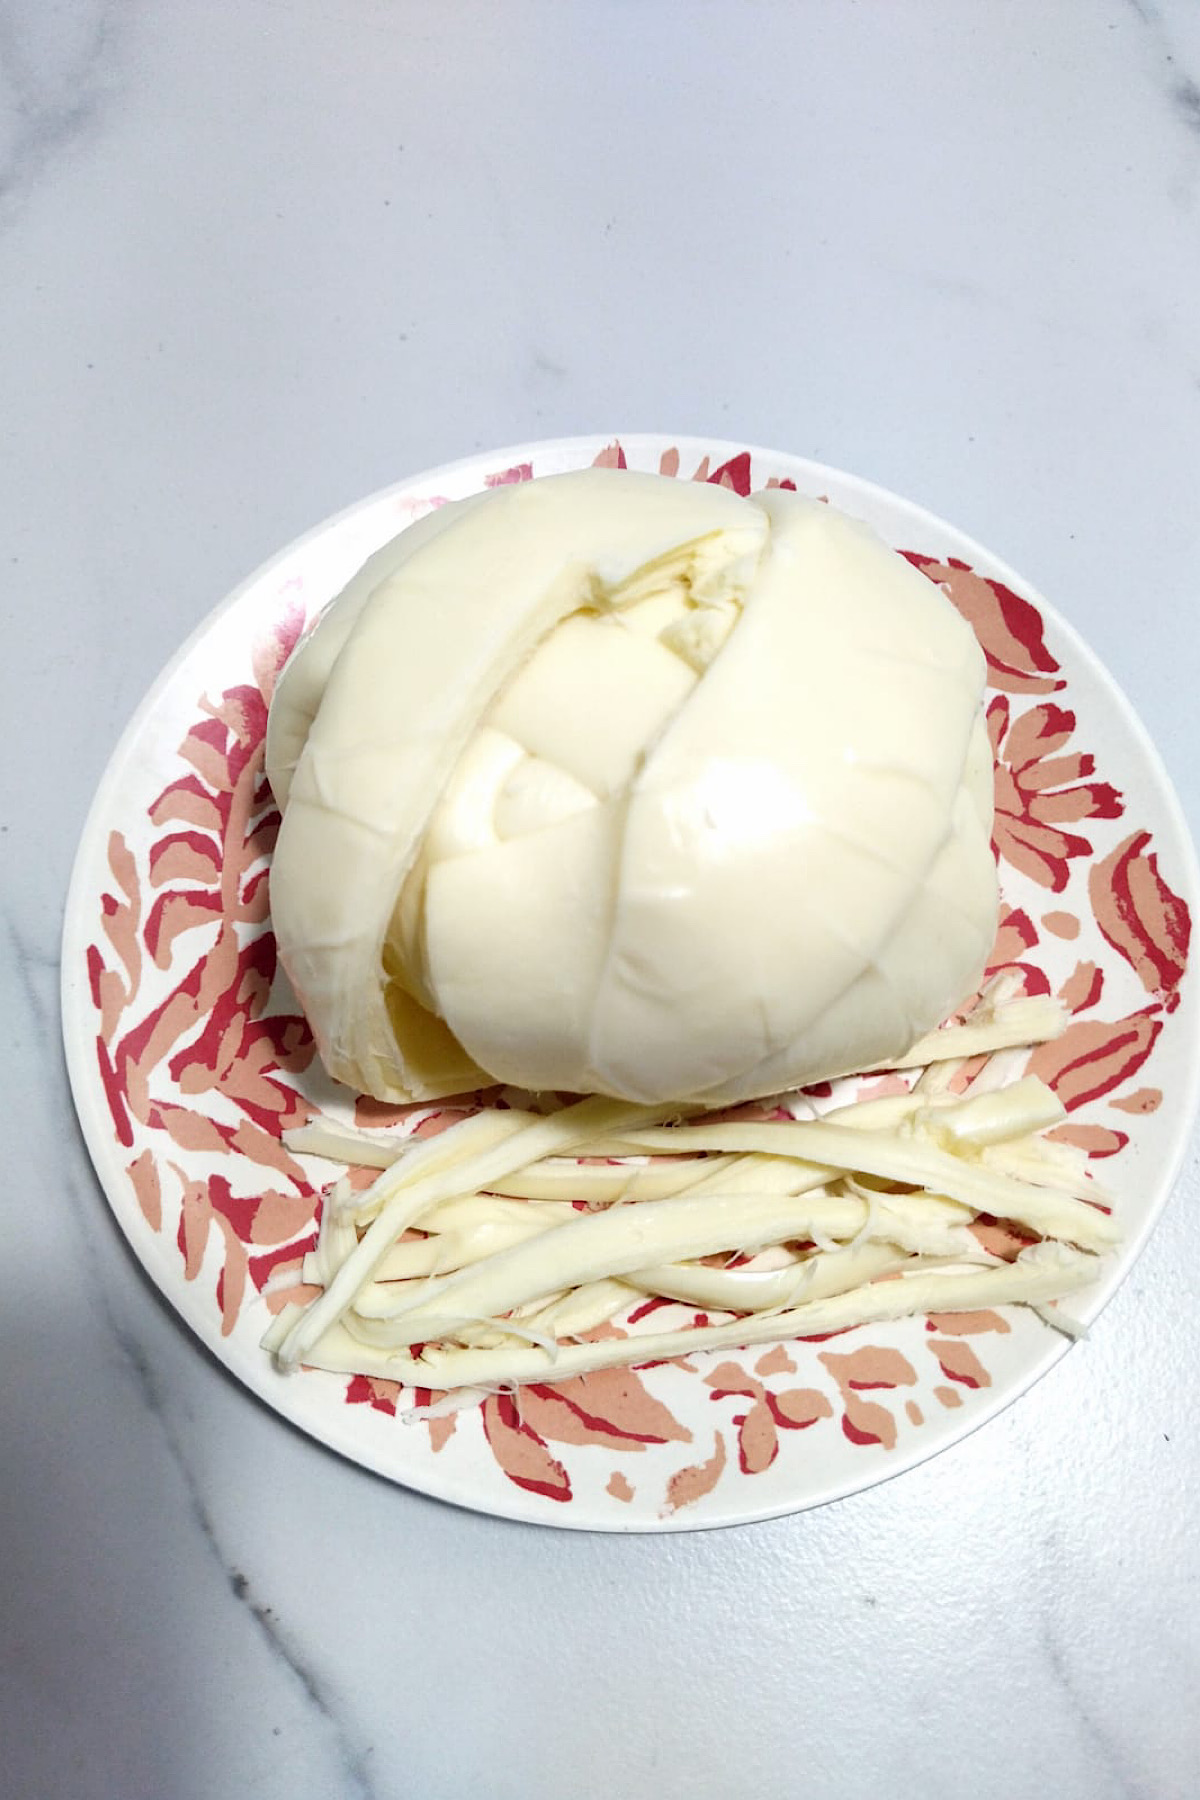 Ball of oaxaca cheese with shredded cheese on the side. 